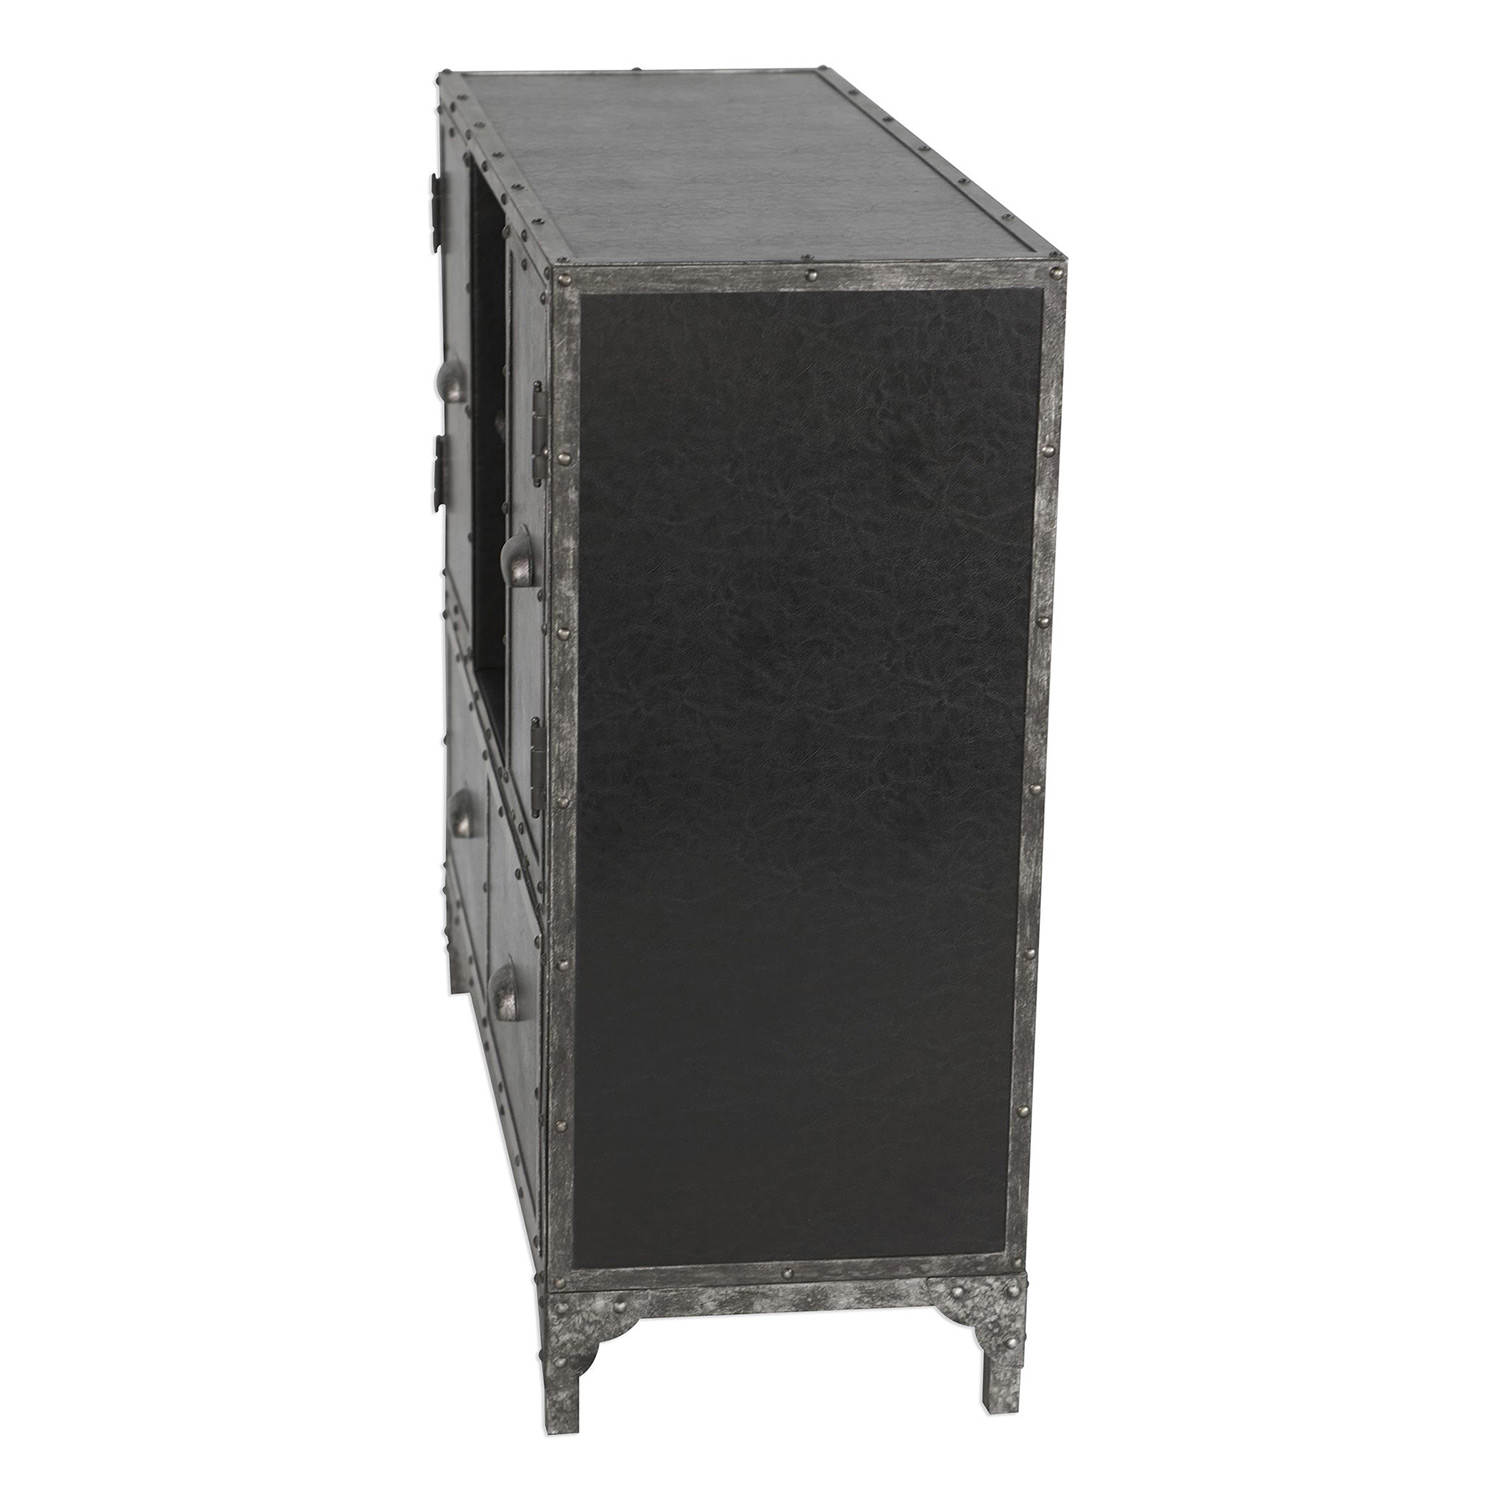 Uttermost Shawn Accent Chest - Black Leather